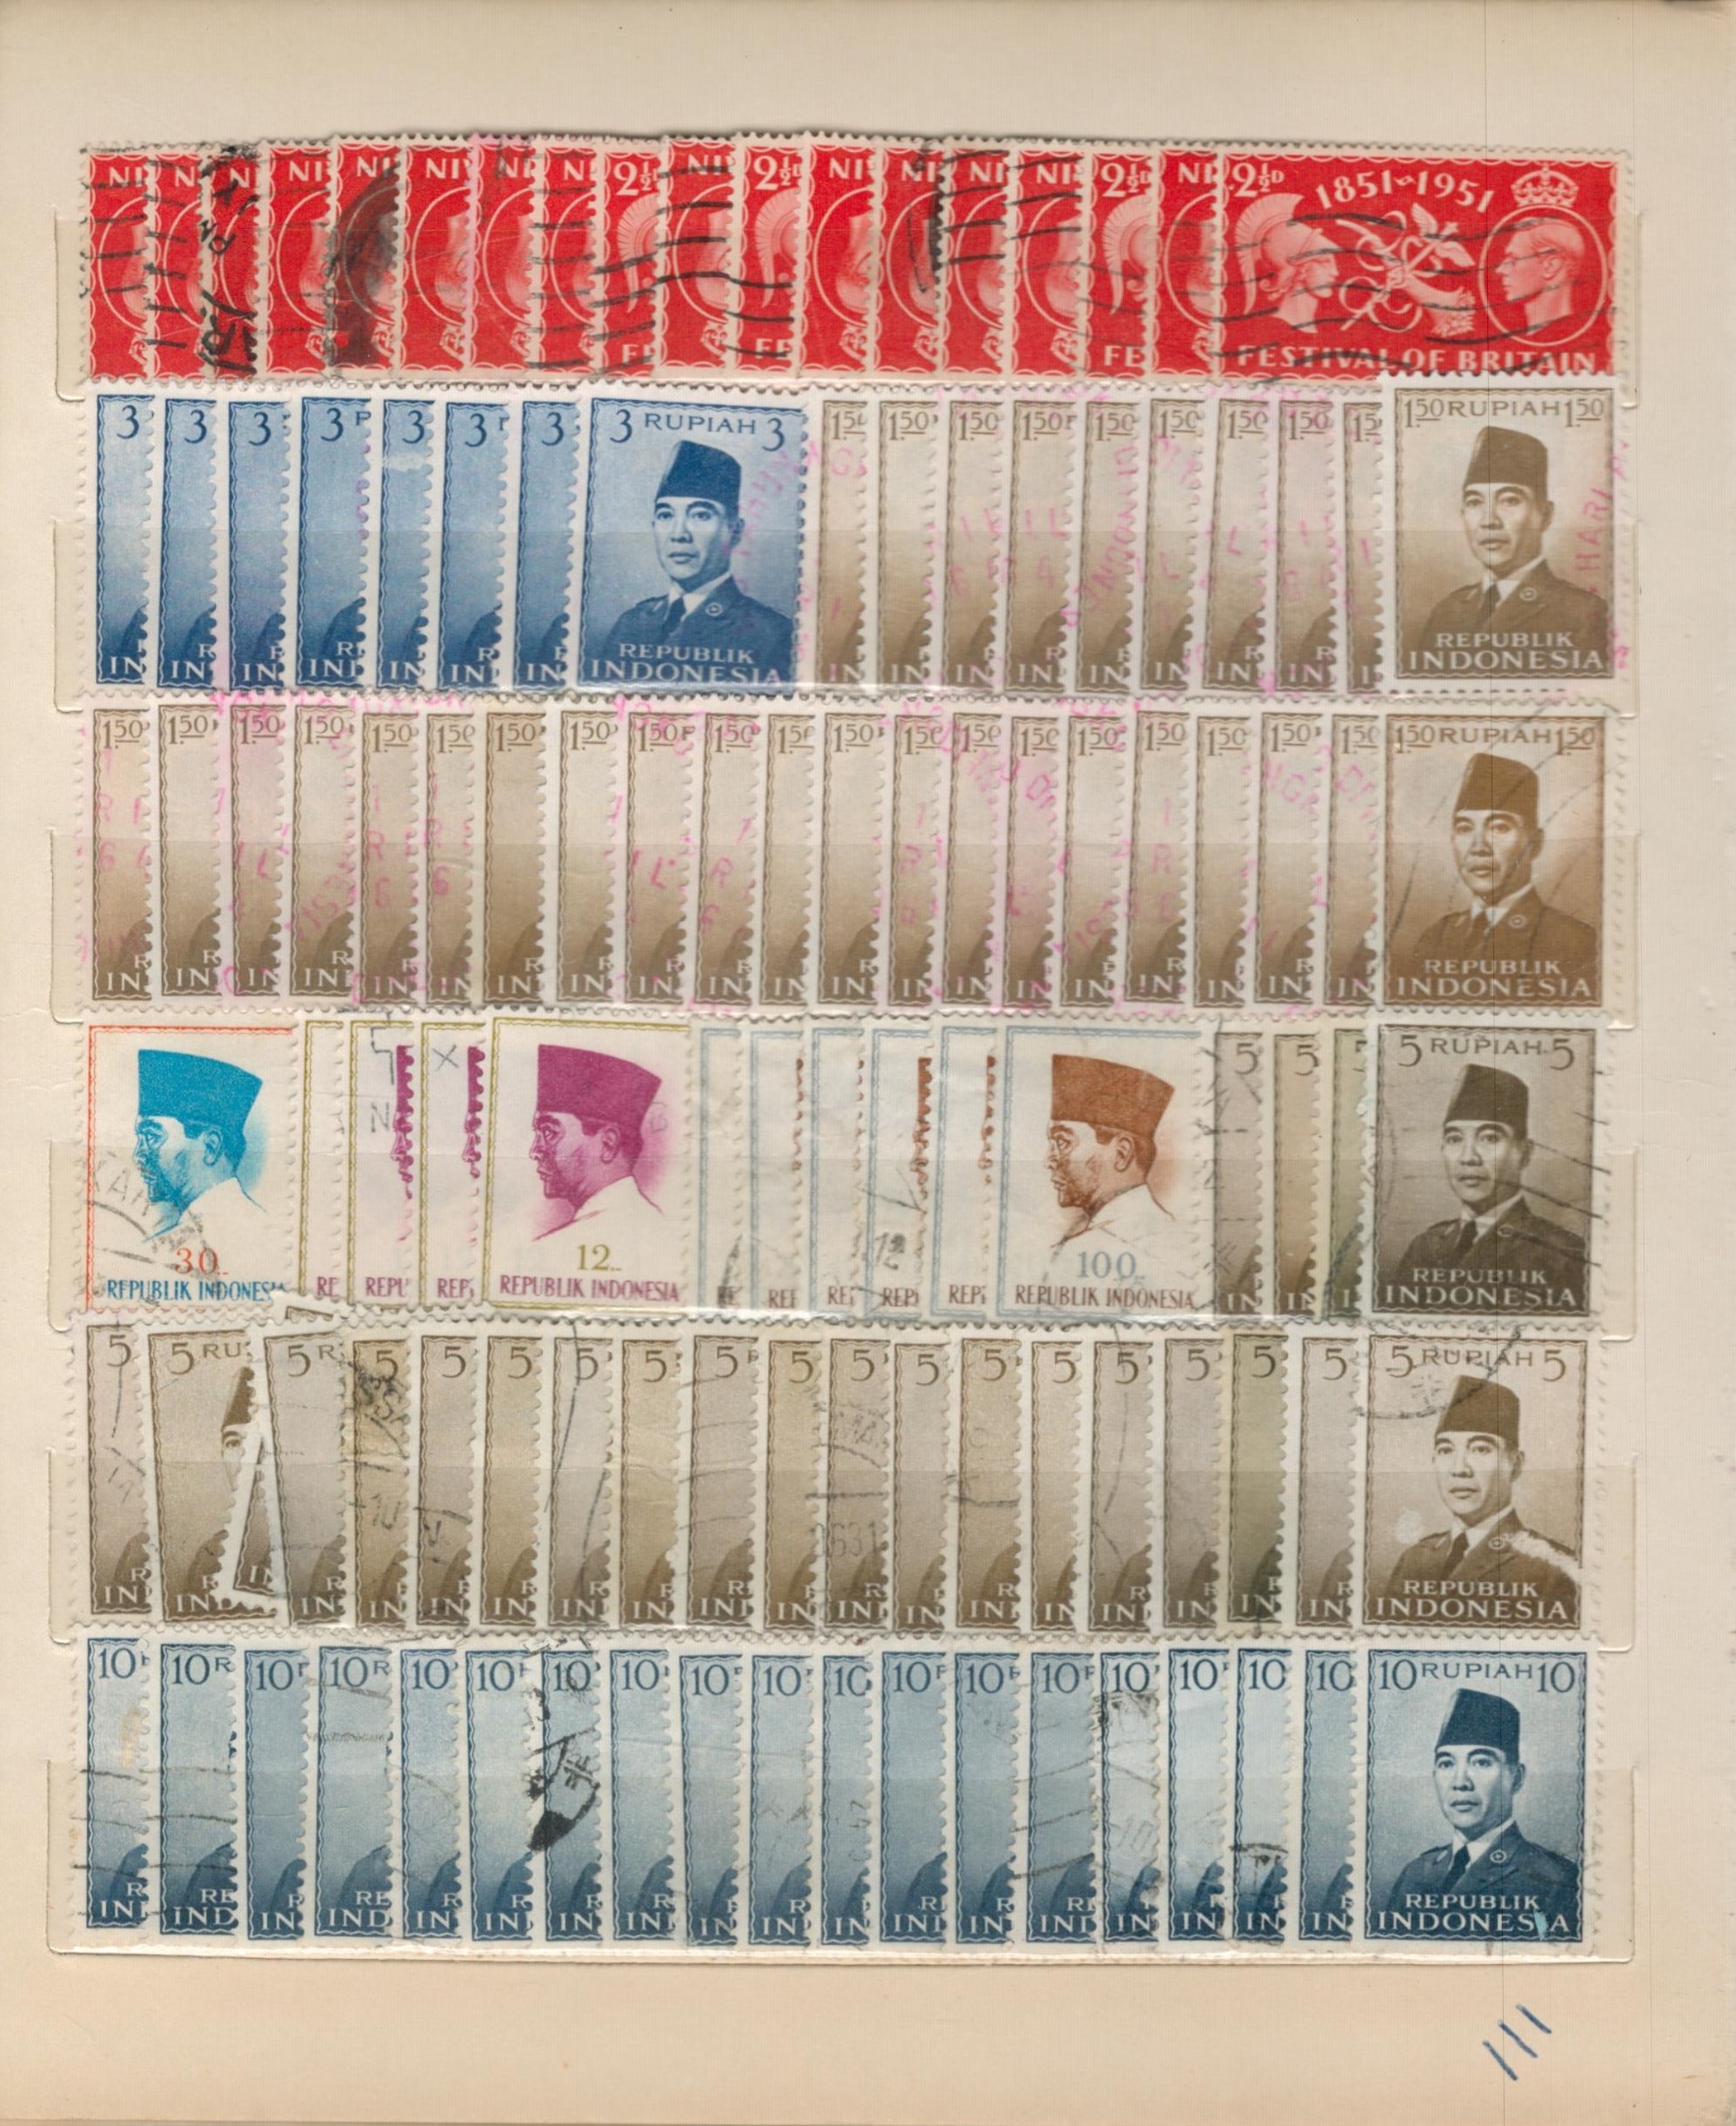 Stockbook with many duplicates of Pre-Decimal Stamps includes National Productivity Year, Festival - Image 2 of 3